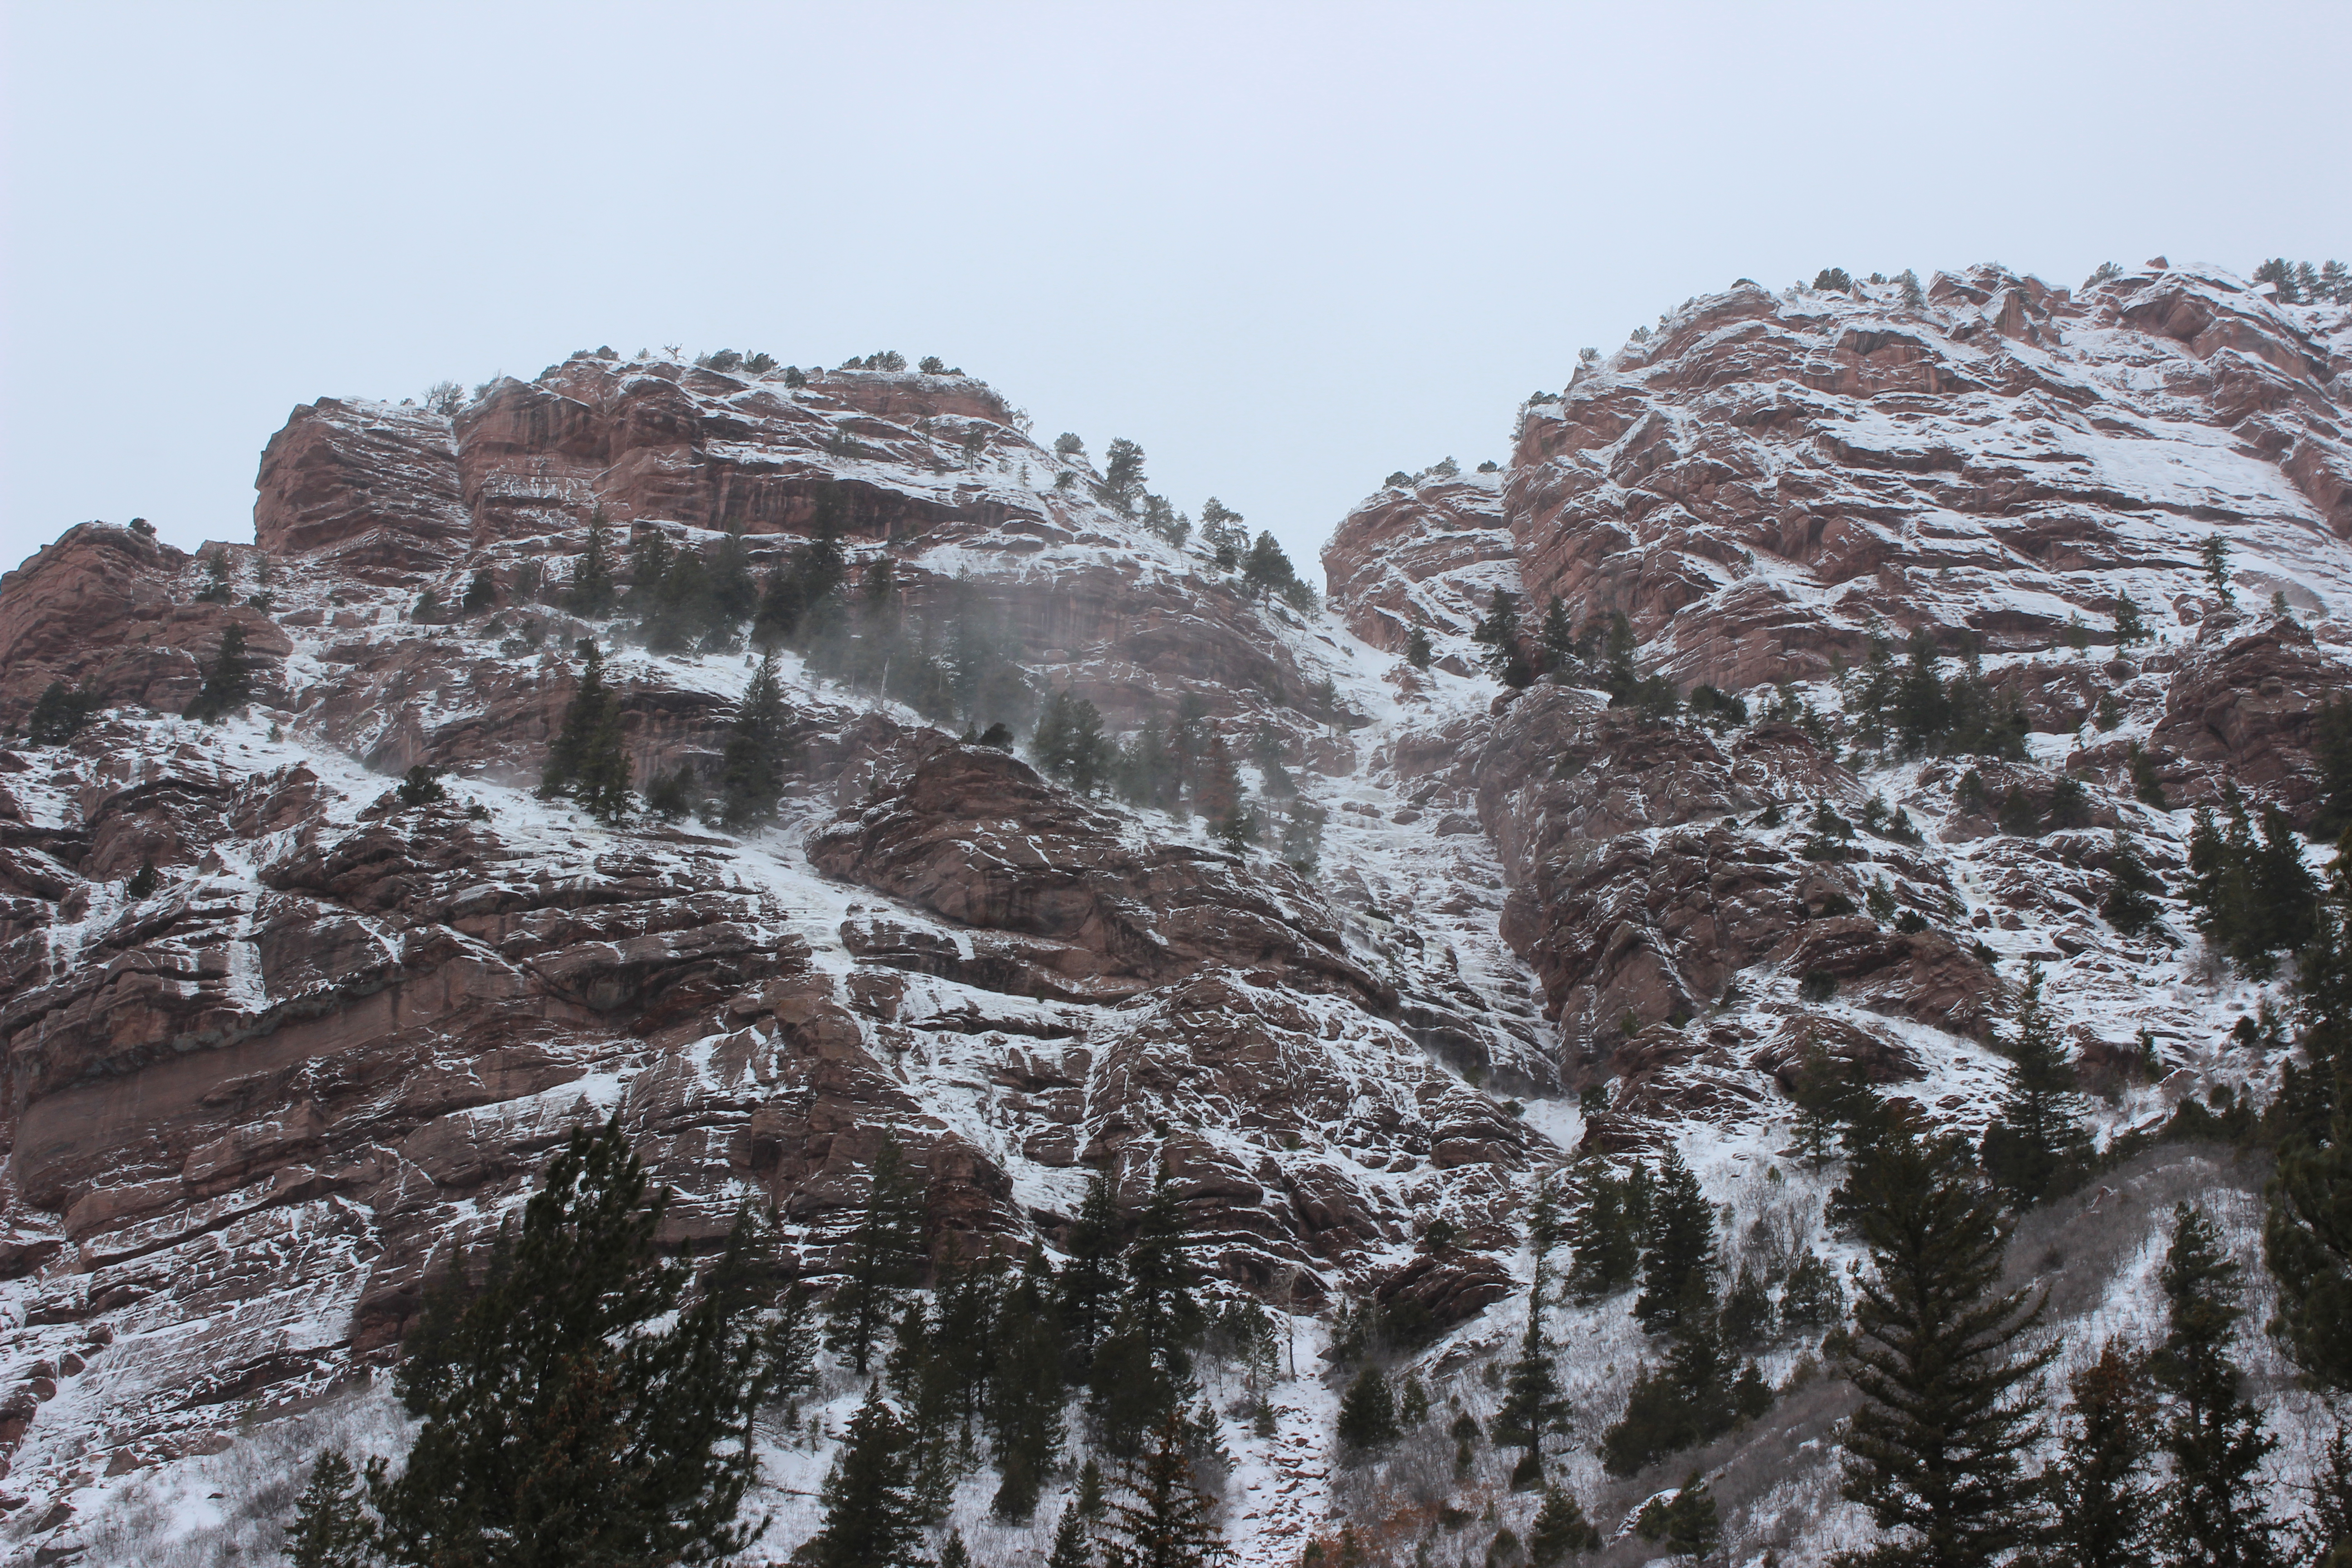 Cliffs covered in snow.